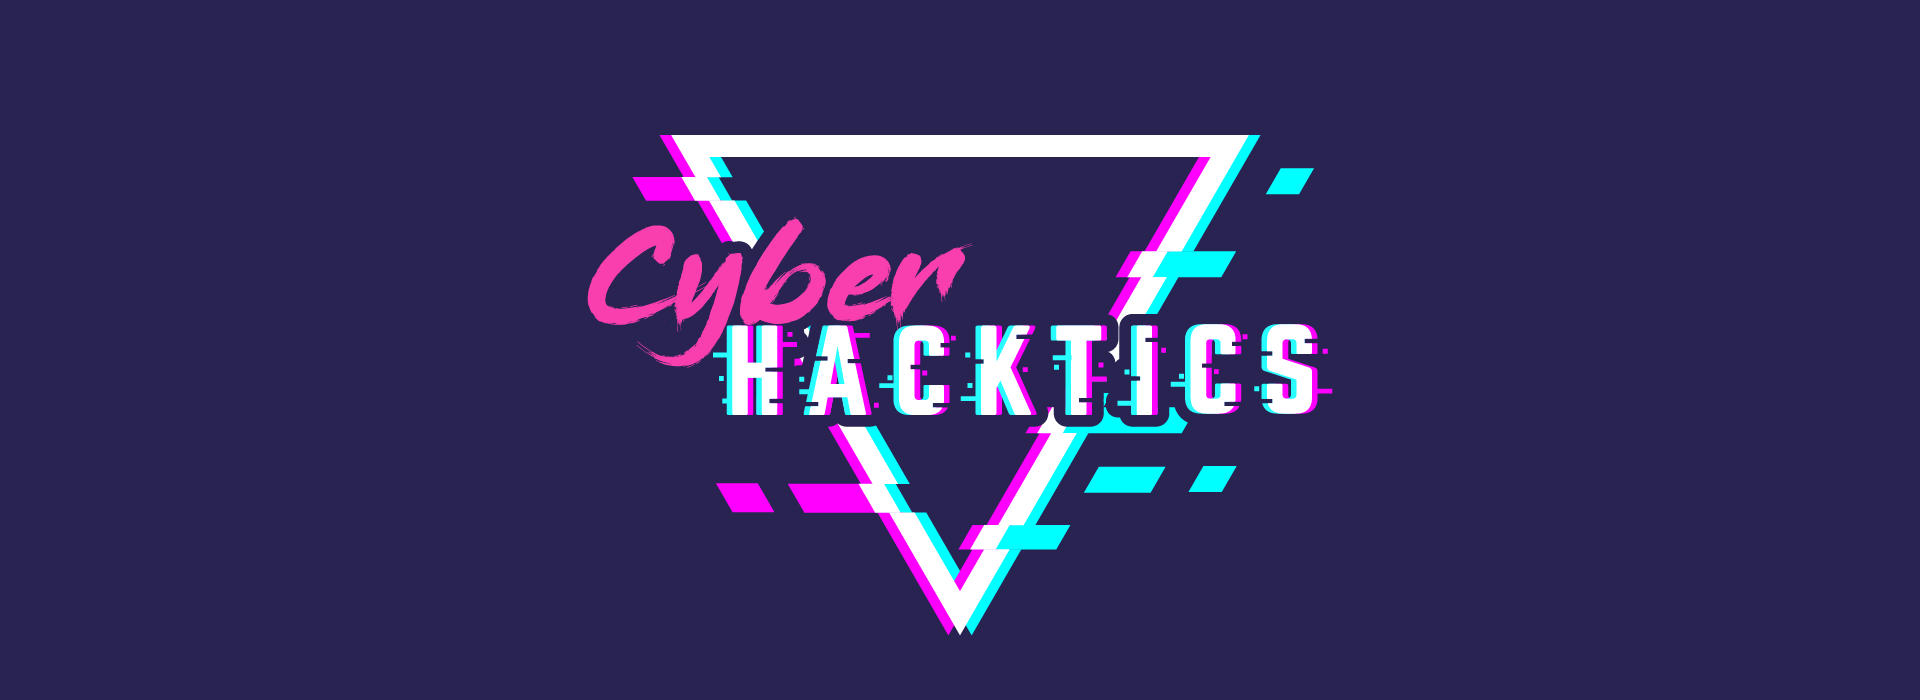 About Cyber Hacktics